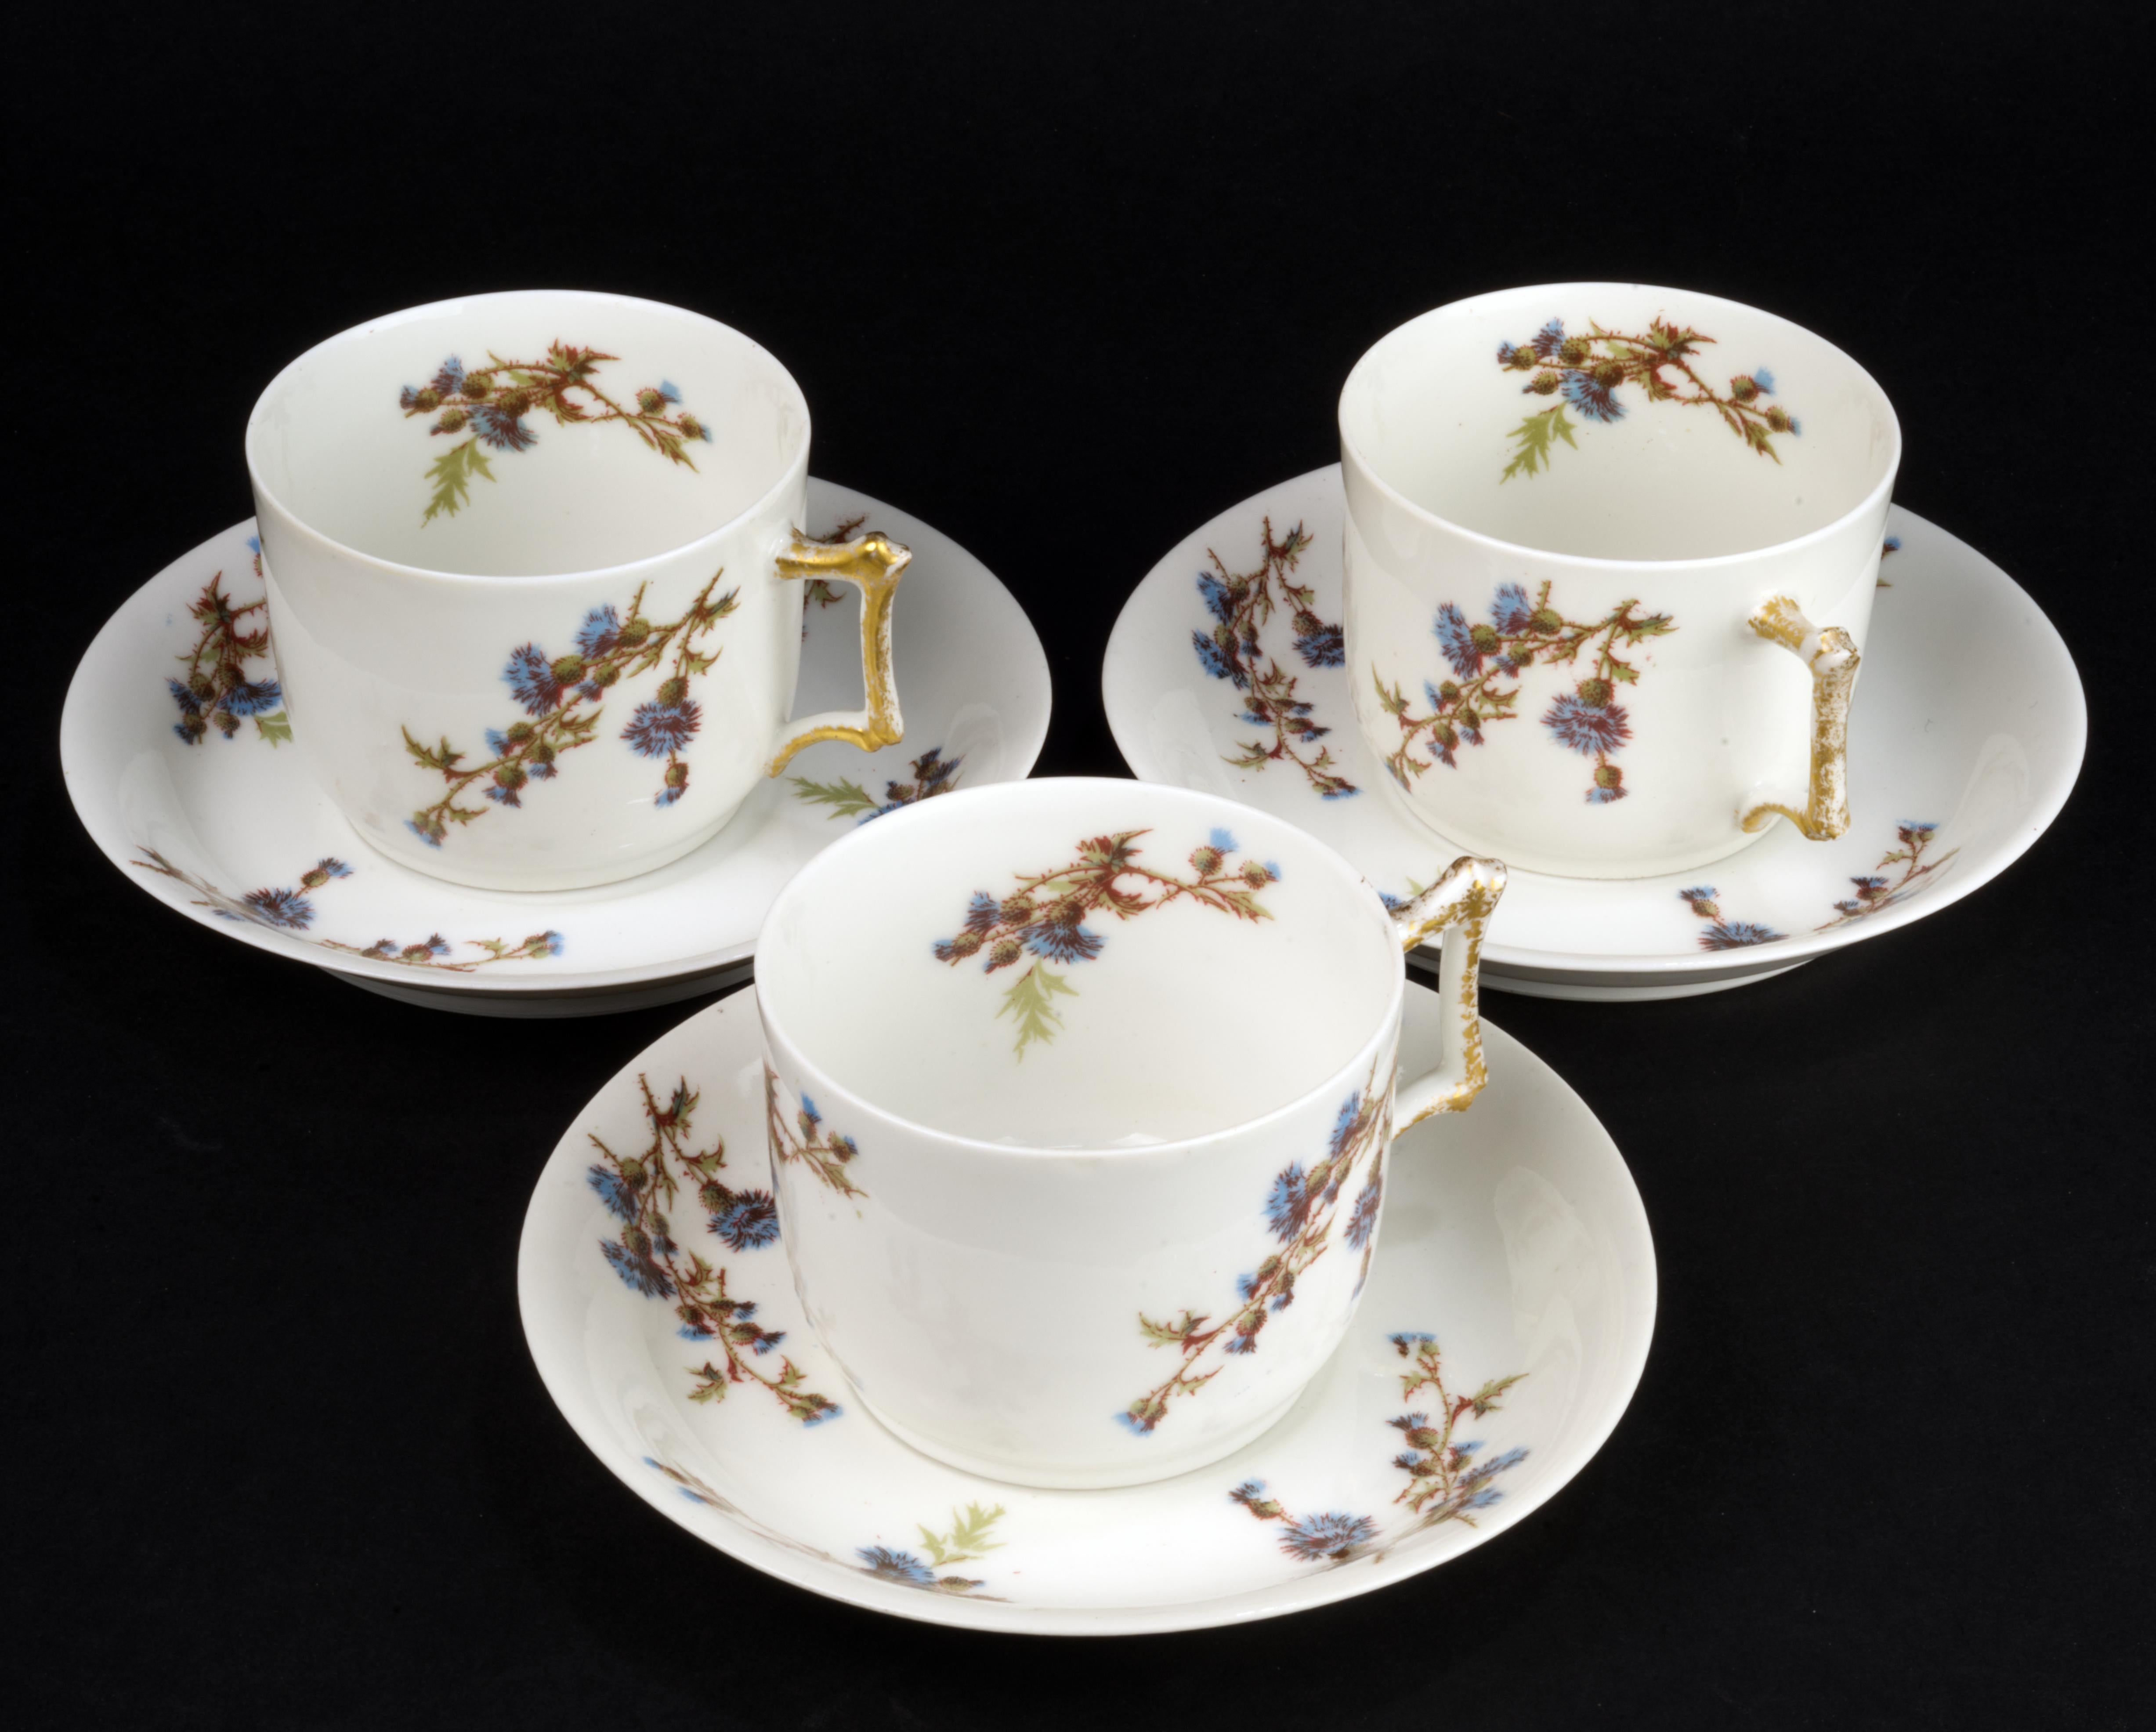 
Set of 3 cups and 3 saucers by Guerin &Co was made of fine, semi-transparent bone china in Limoges, France. The set is hand decorated in Victorian style with ornamental blue and brown thistle flowers motifs on white background and gold trim on cups